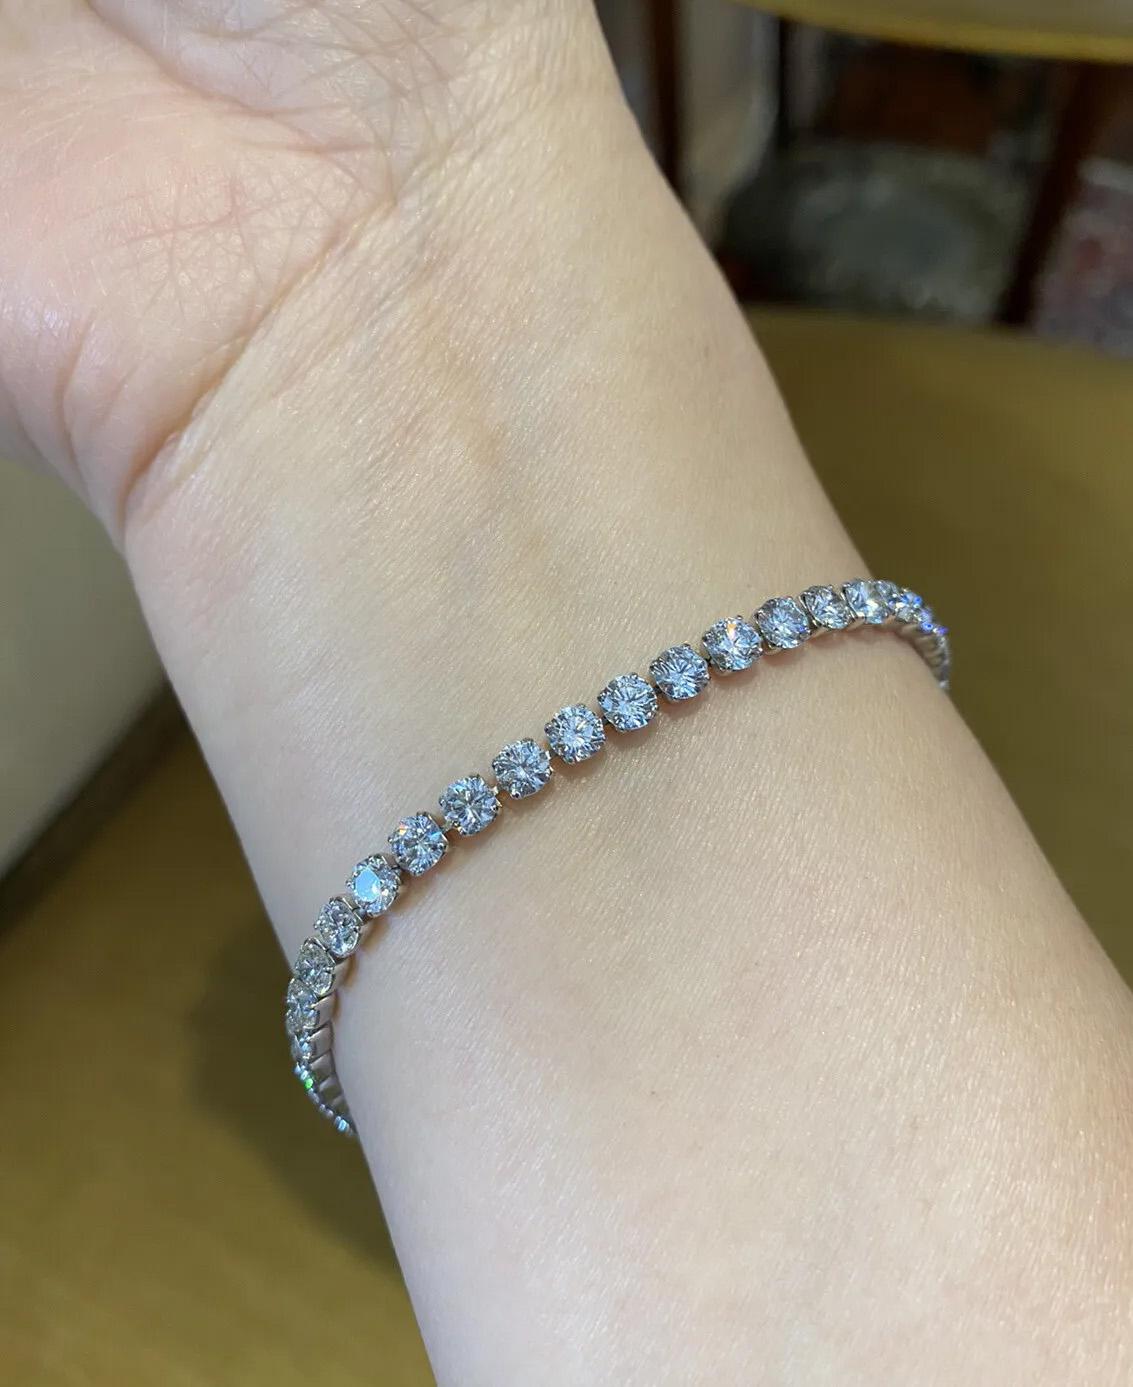 10.00 carat Diamond Tennis Bracelet in Platinum 8.25 inches

Diamond Tennis Bracelet features 48 Round Brilliant cut Diamonds set in Platinum. Bracelet is secured by a tongue clasp with a safety latch.

Total diamond weight is 10.00